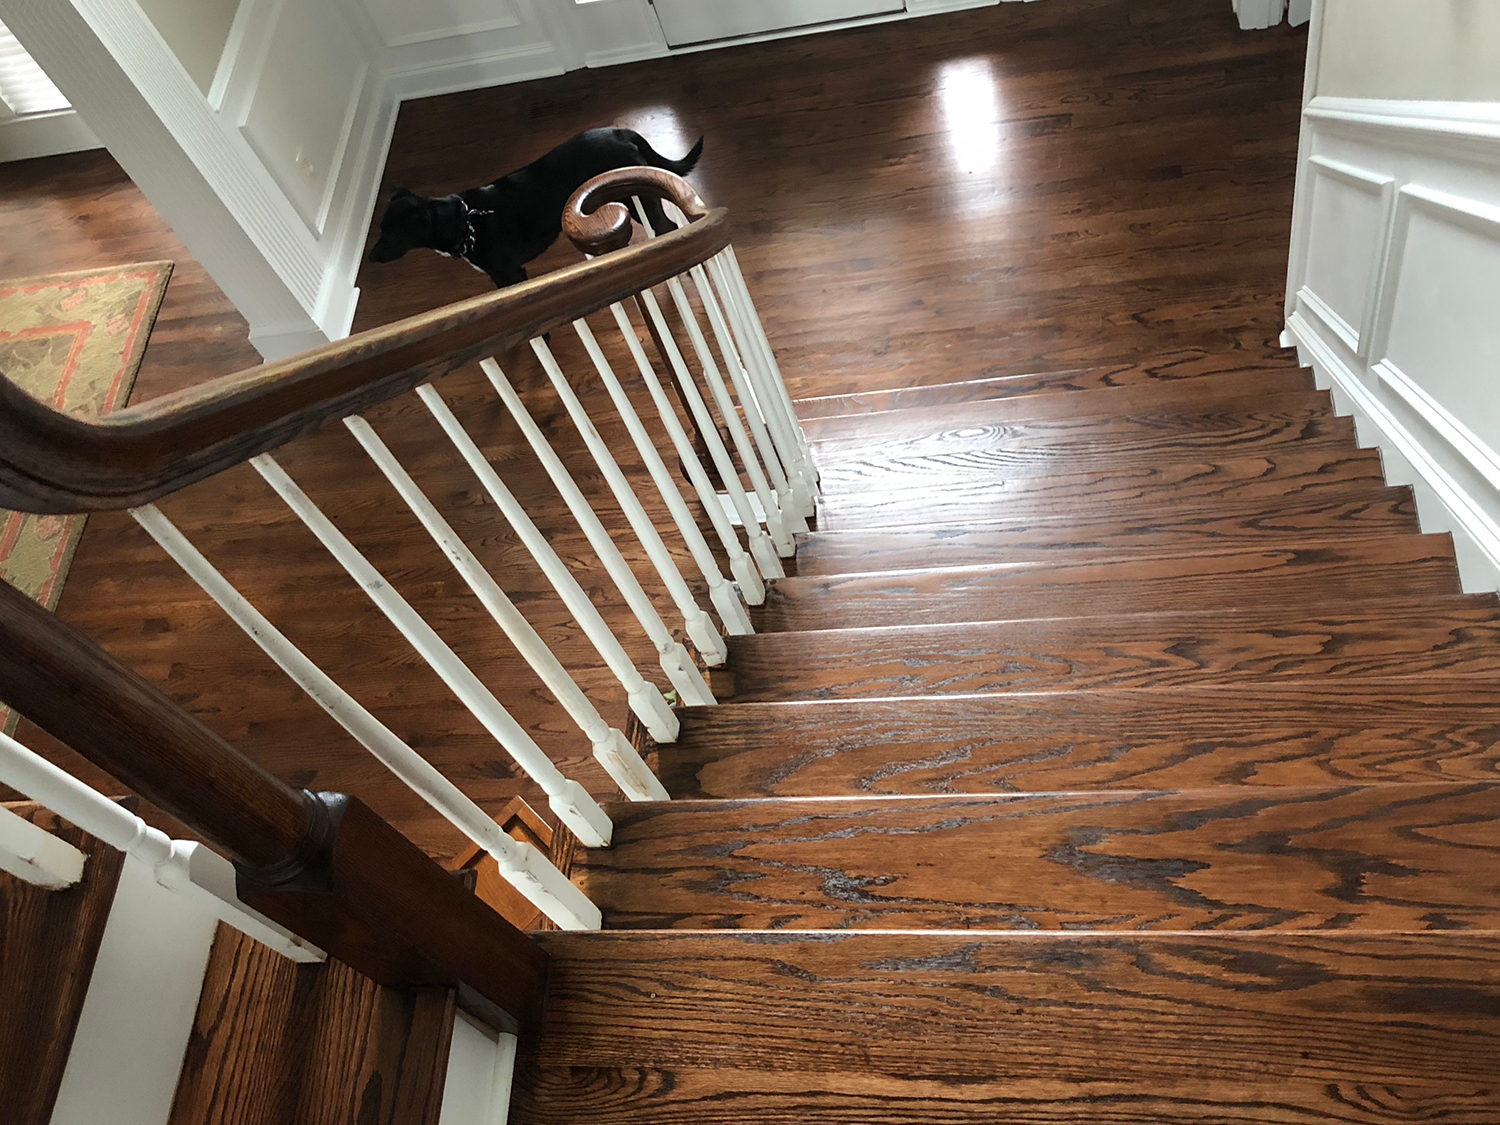 Original Hard Wood Stairs in Ruxton Towson Perry Hall Dundalk area Refinished by Baltimore flooring contractors with white wood rails and oak wood steps that are restored and beautiful